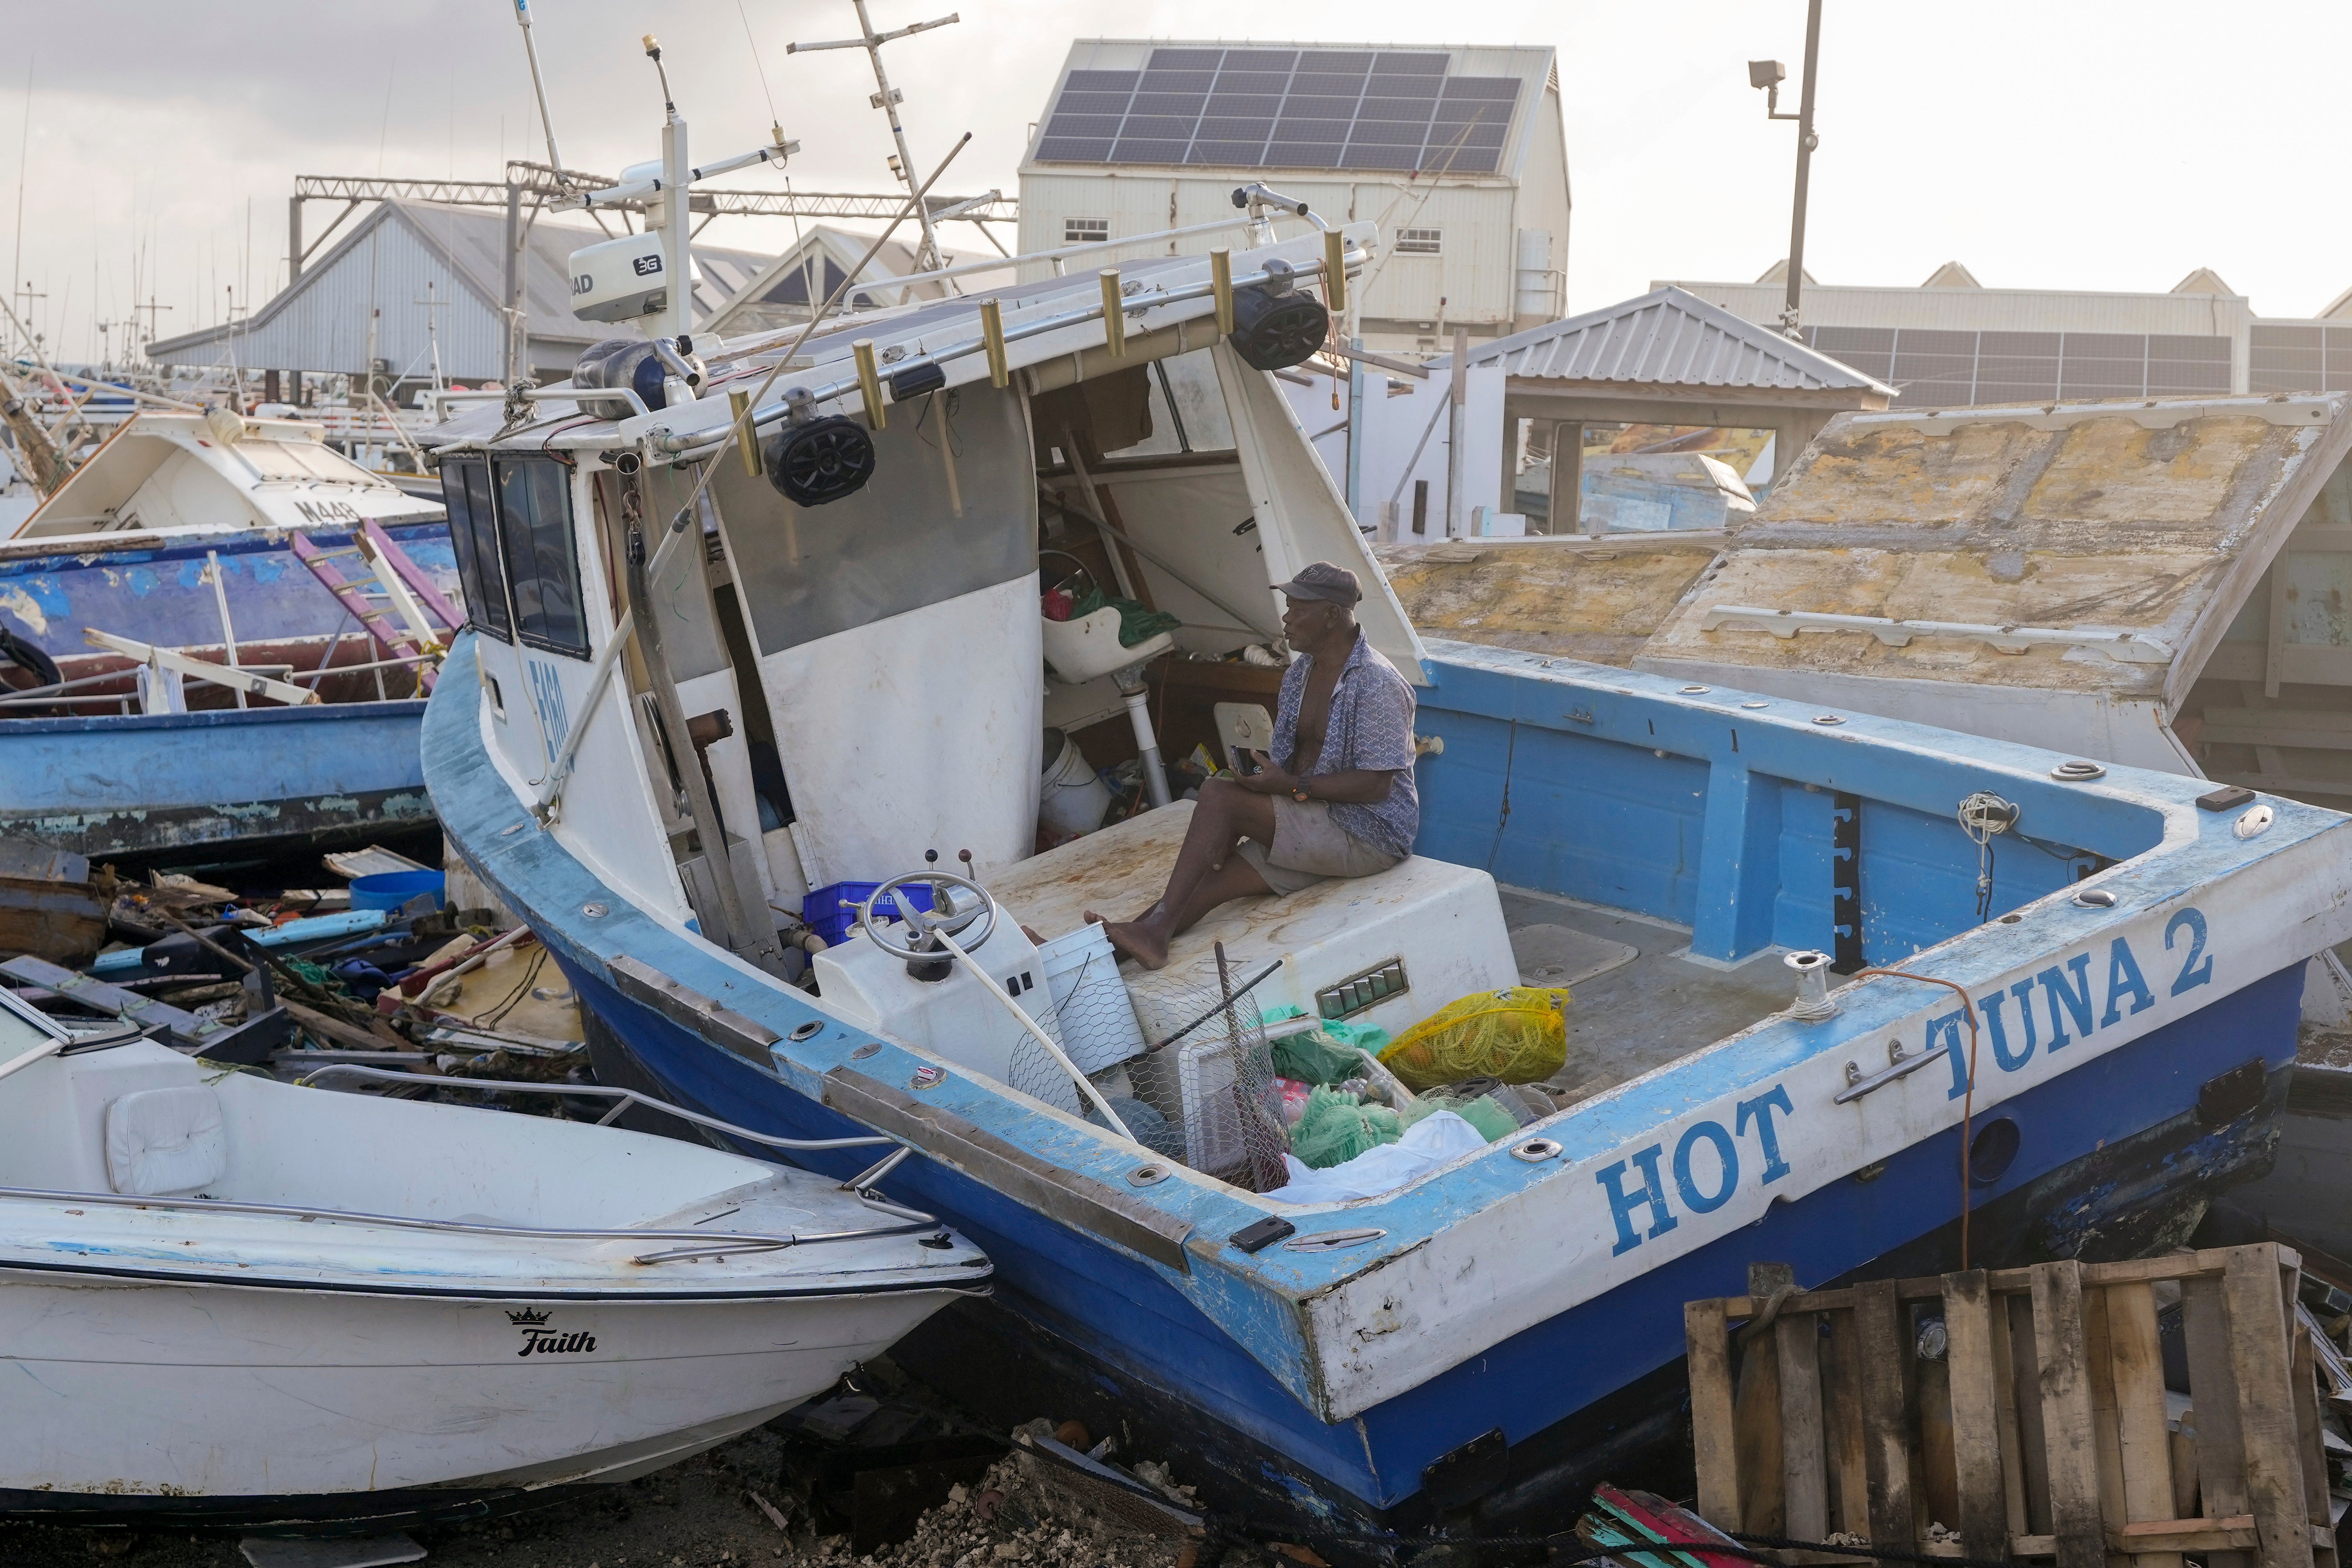 Fisherman Hamilton Cosmos looks at vessels damaged by Hurricane Beryl at the Bridgetown Fisheries in Barbados